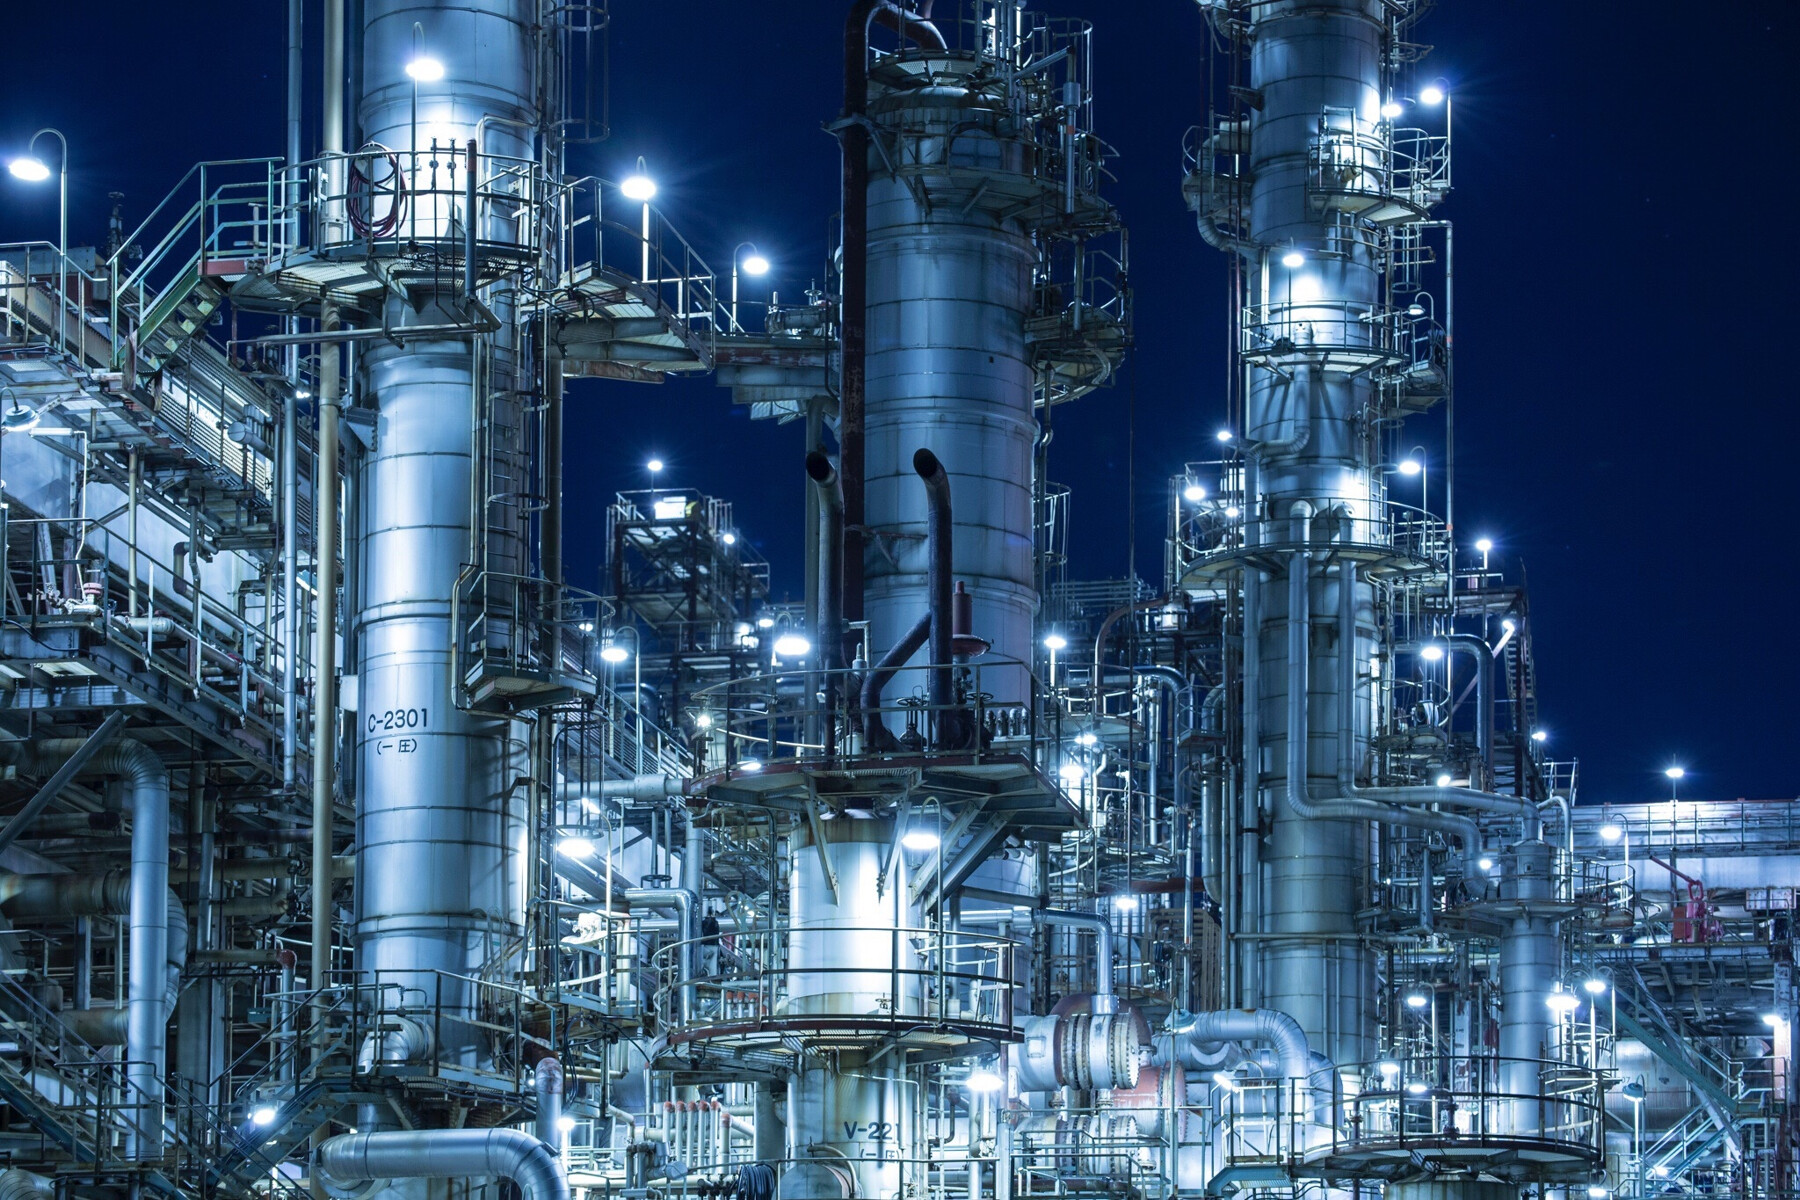 Looking for energy efficiency: Industrial plants with many pipes